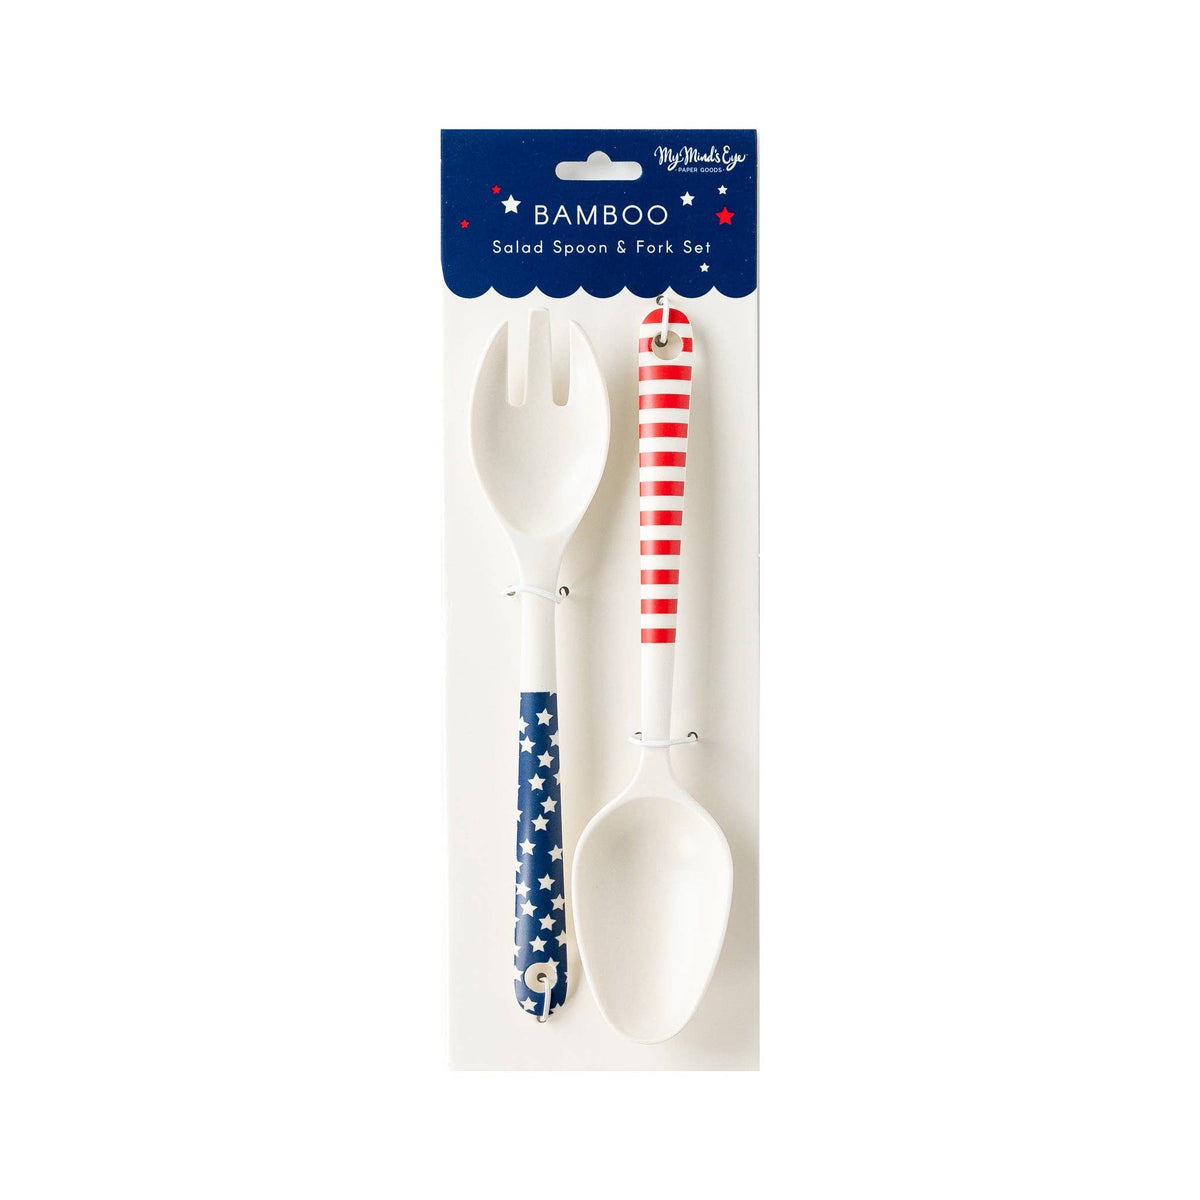 Stars and Stripes Salad Spoon and Fork Reusable Bamboo Serving-ware - The Preppy Bunny